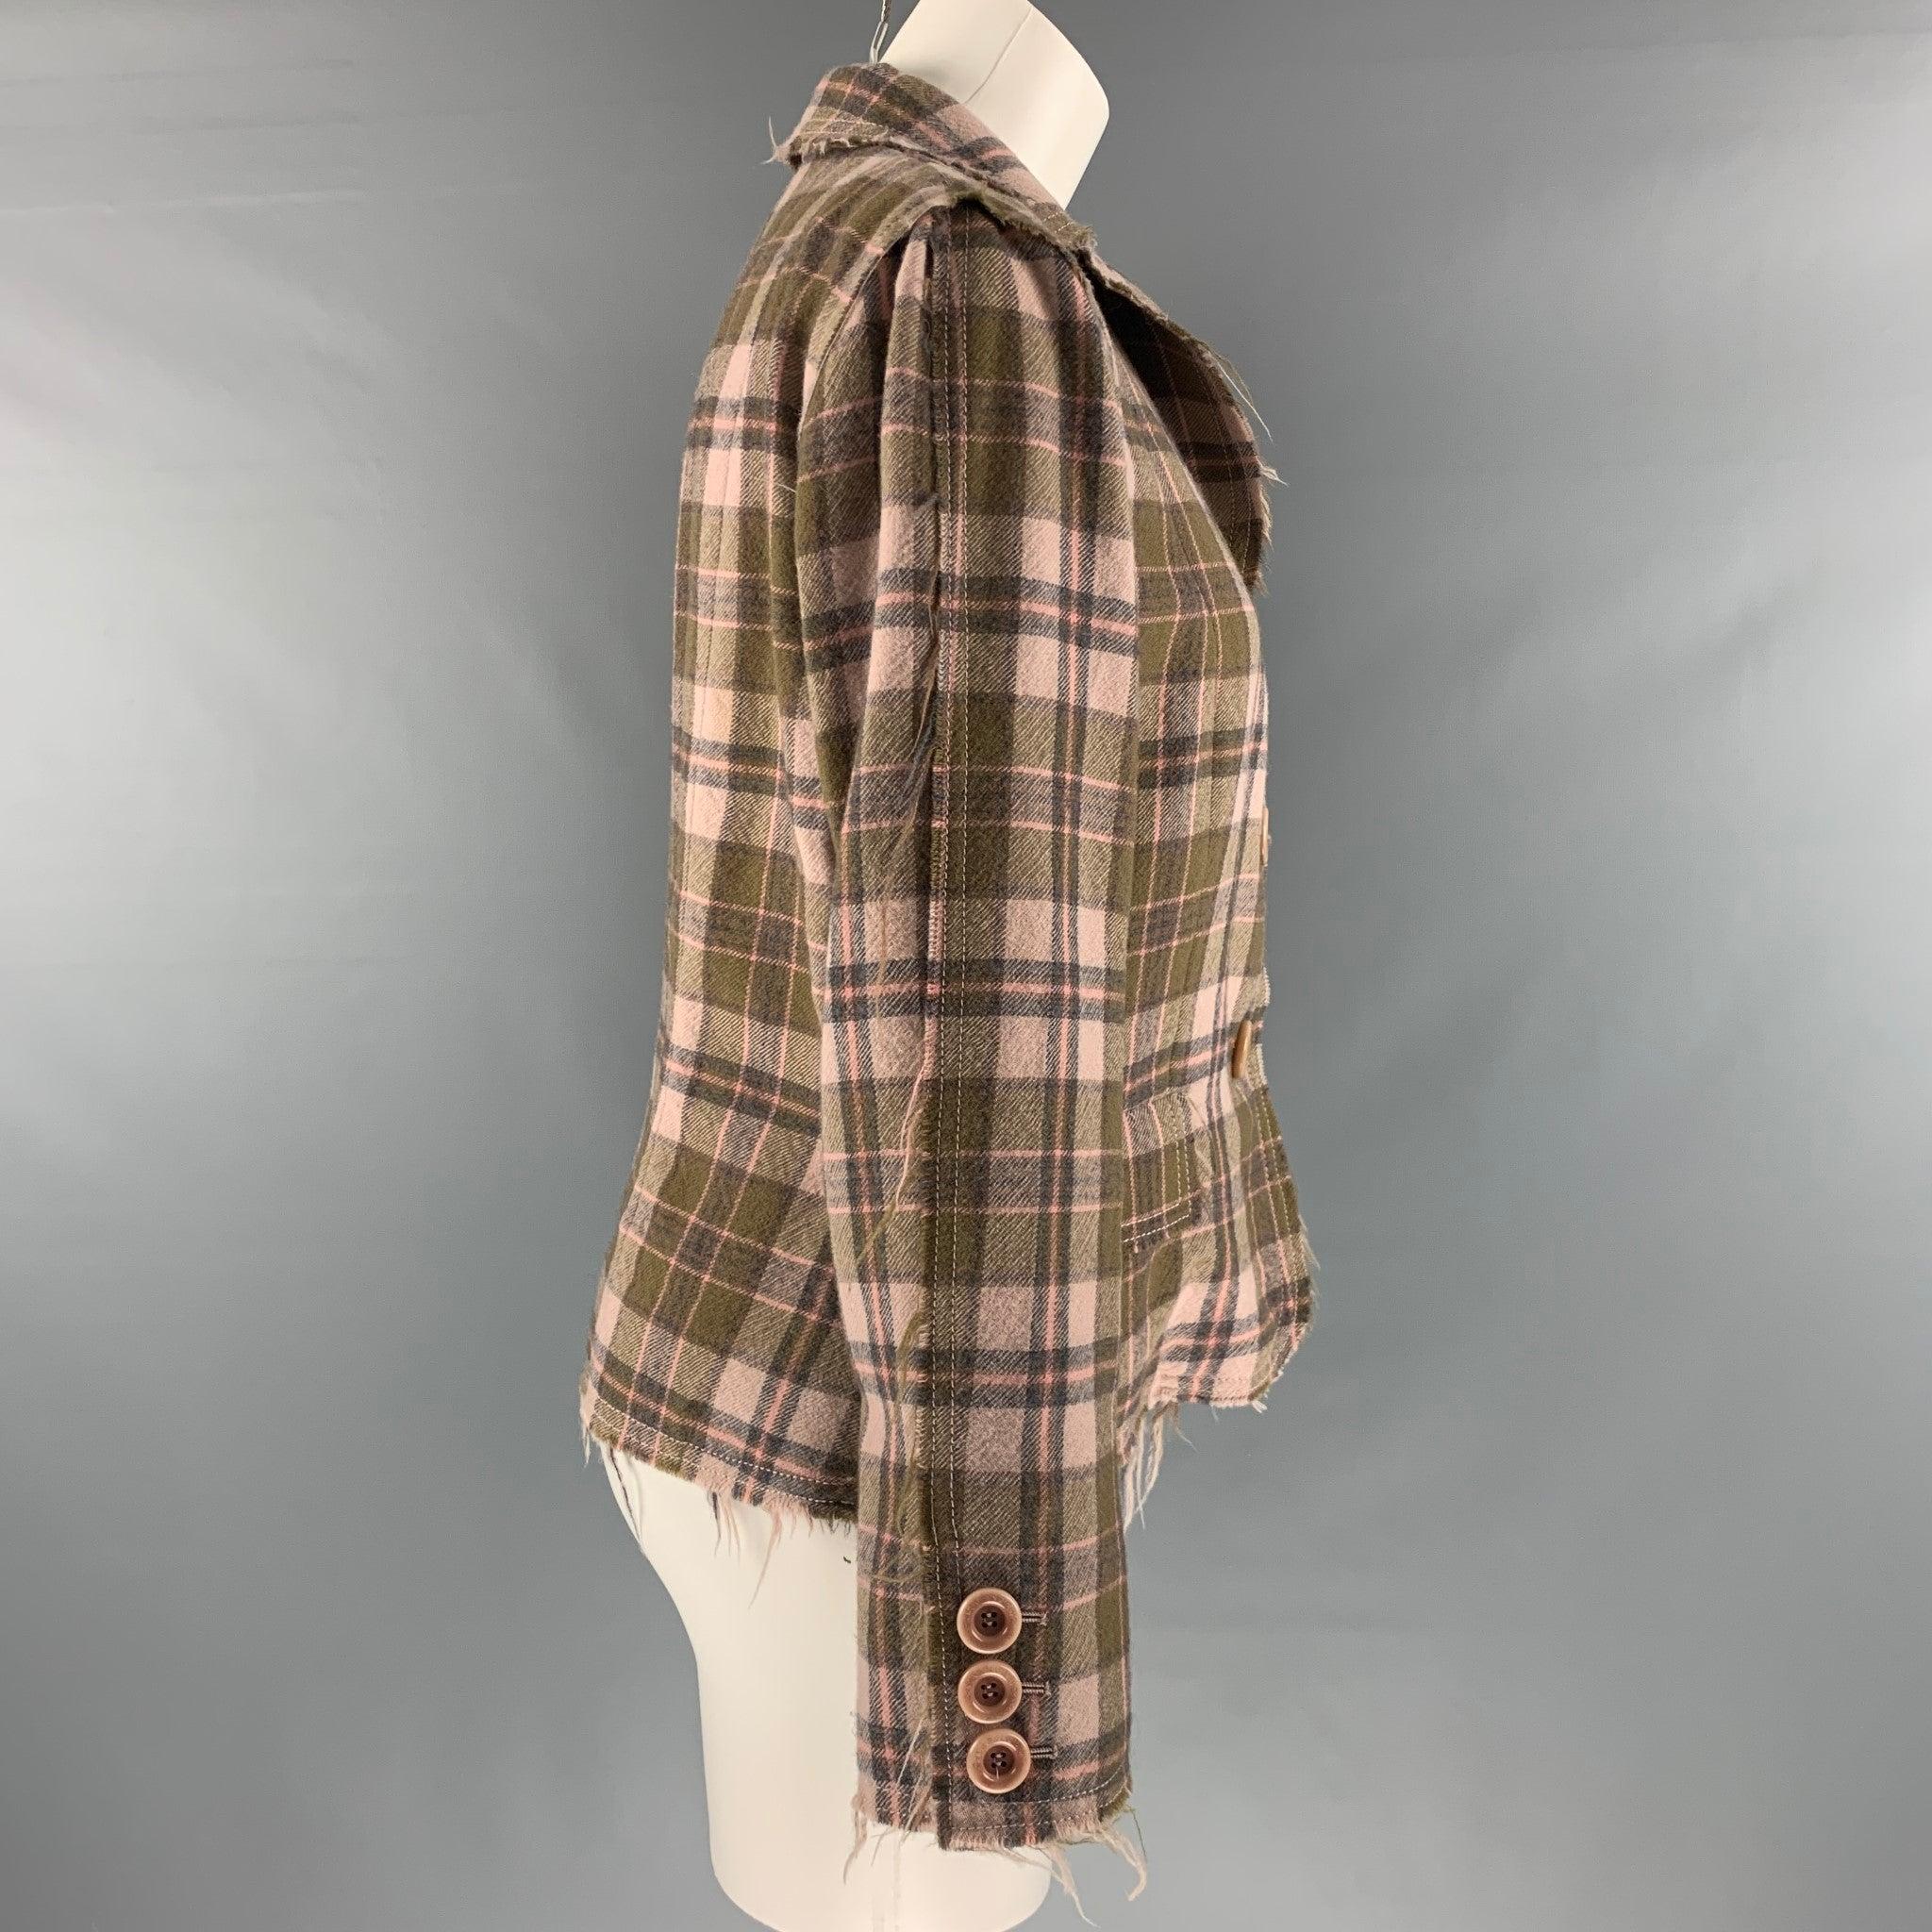 MOSCHINO Cheap and Chic jacket comes in a pink and olive plaid wool twill material featuring a raw edge, no lining, and button up closure. Made in Italy.Very Good Pre-Owned Condition. Minor signs of wear. 

Marked:   12 

Measurements: 
 
Shoulder: